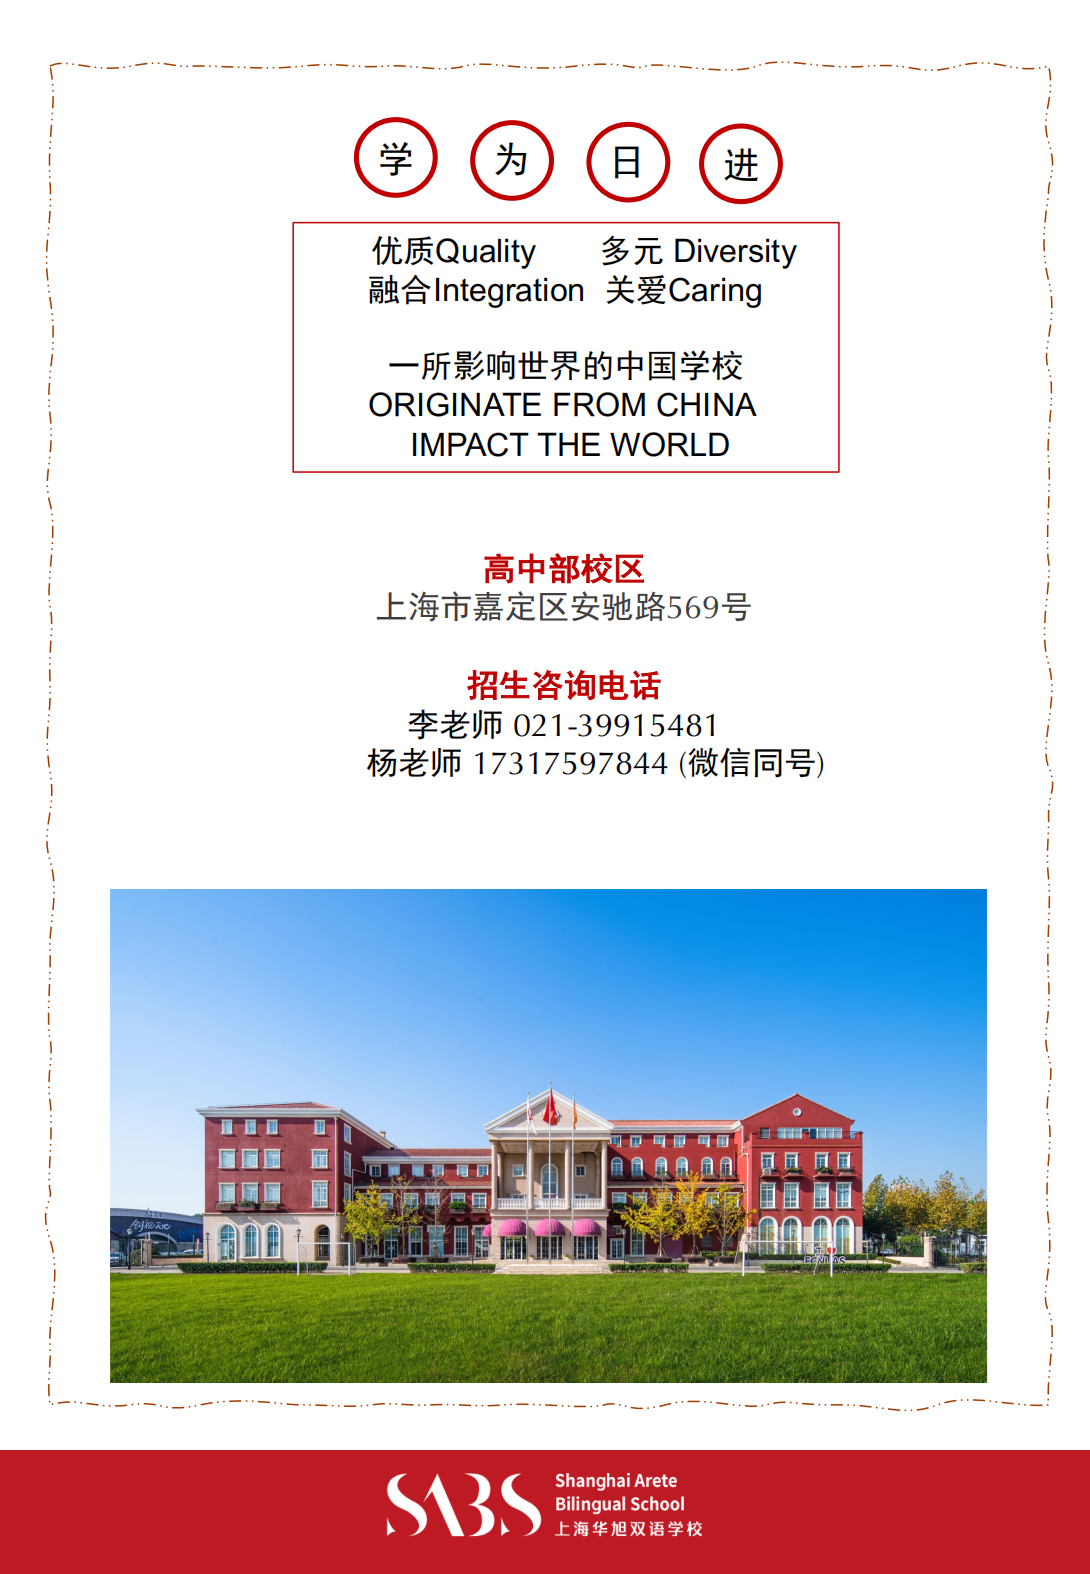 HS 7th Issue Newsletter pptx（Chinese）_11.png